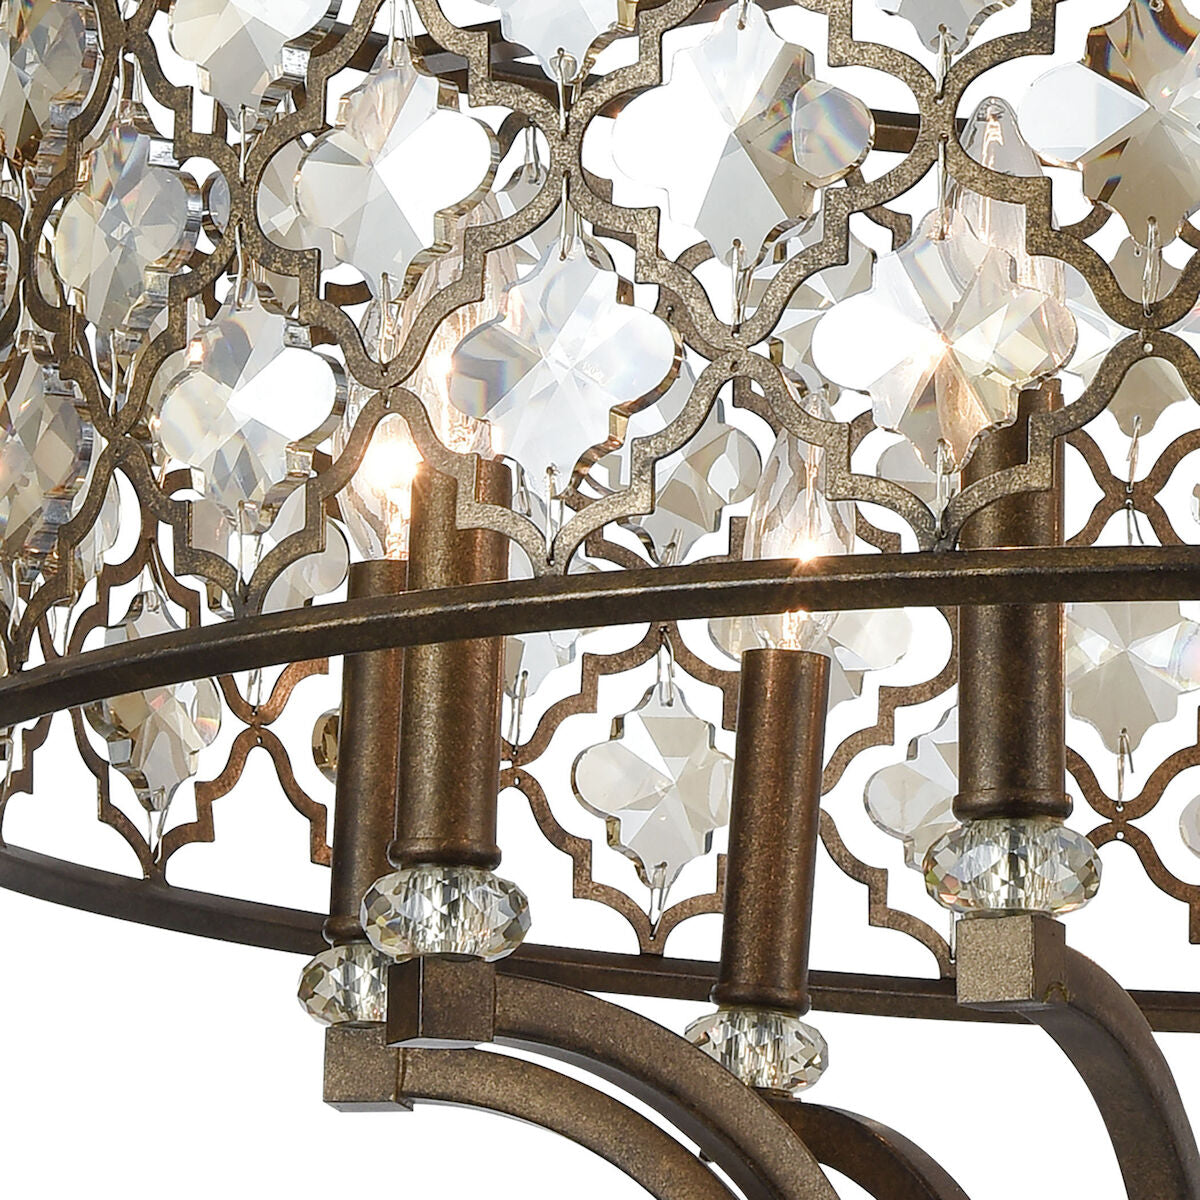 ARMAND 32'' WIDE 9-LIGHT CHANDELIER - FREE SHIPPING !!!